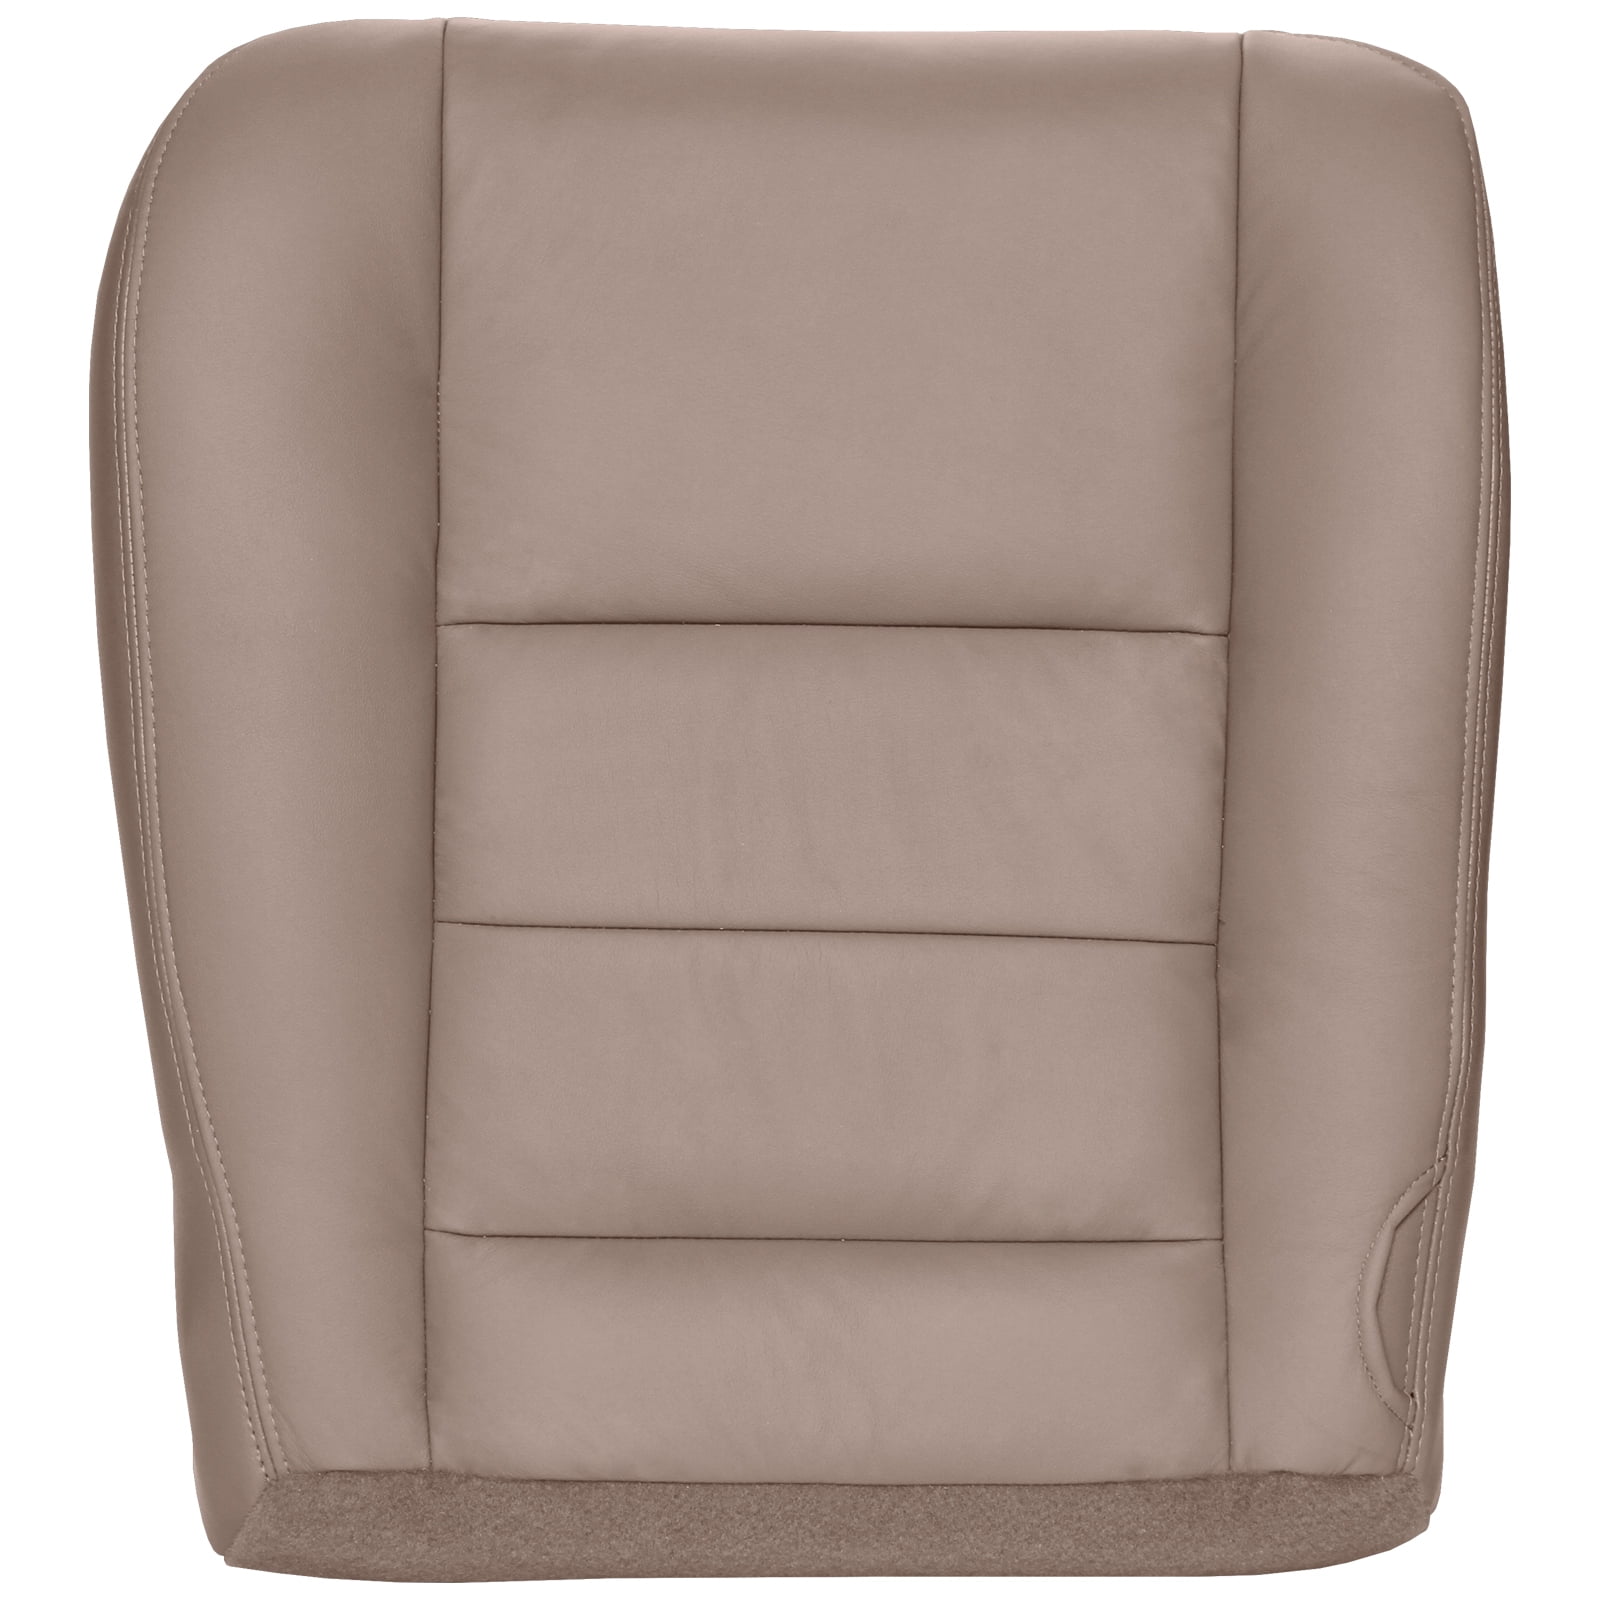 Durafit Seat Covers Made to fit 2000-2005 Ford Excursion Front High Back Bucket Seats Made in Tan Leatherette 